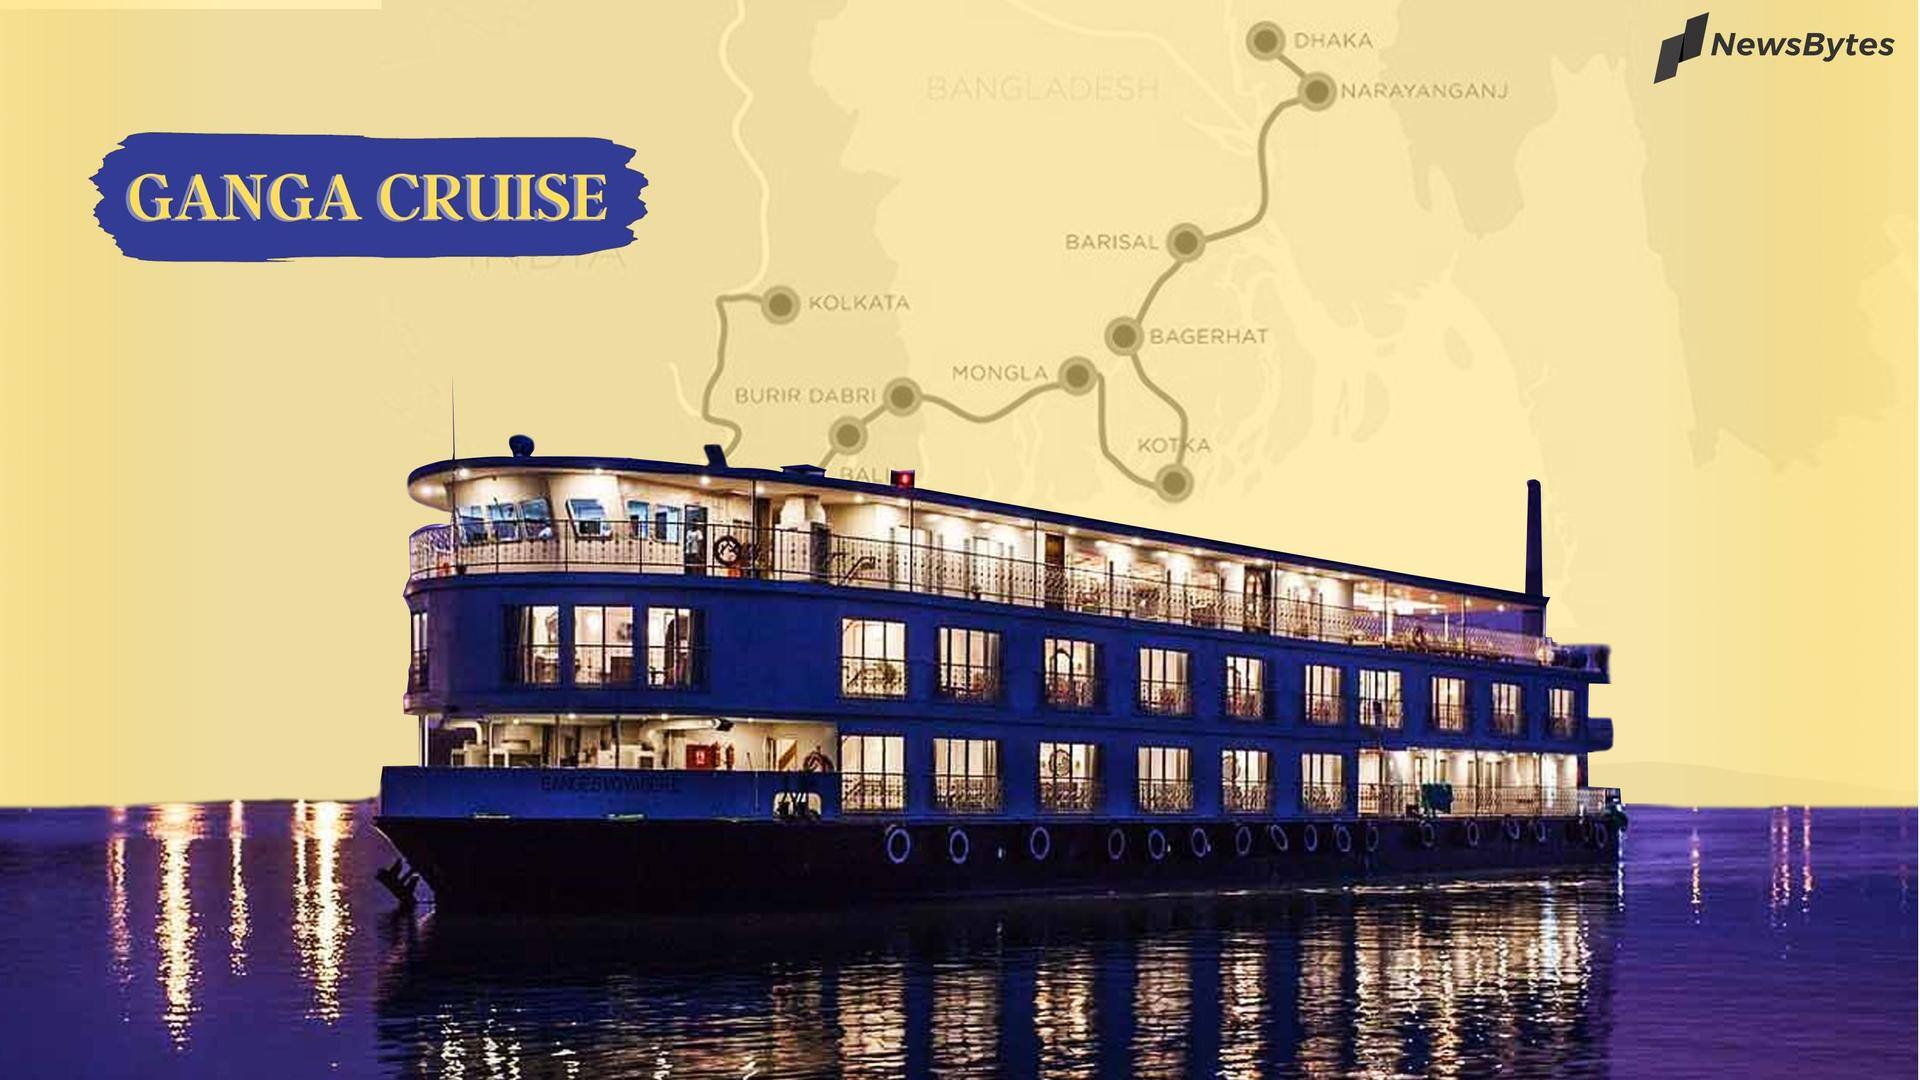 World's longest river cruise set to start from January 2023